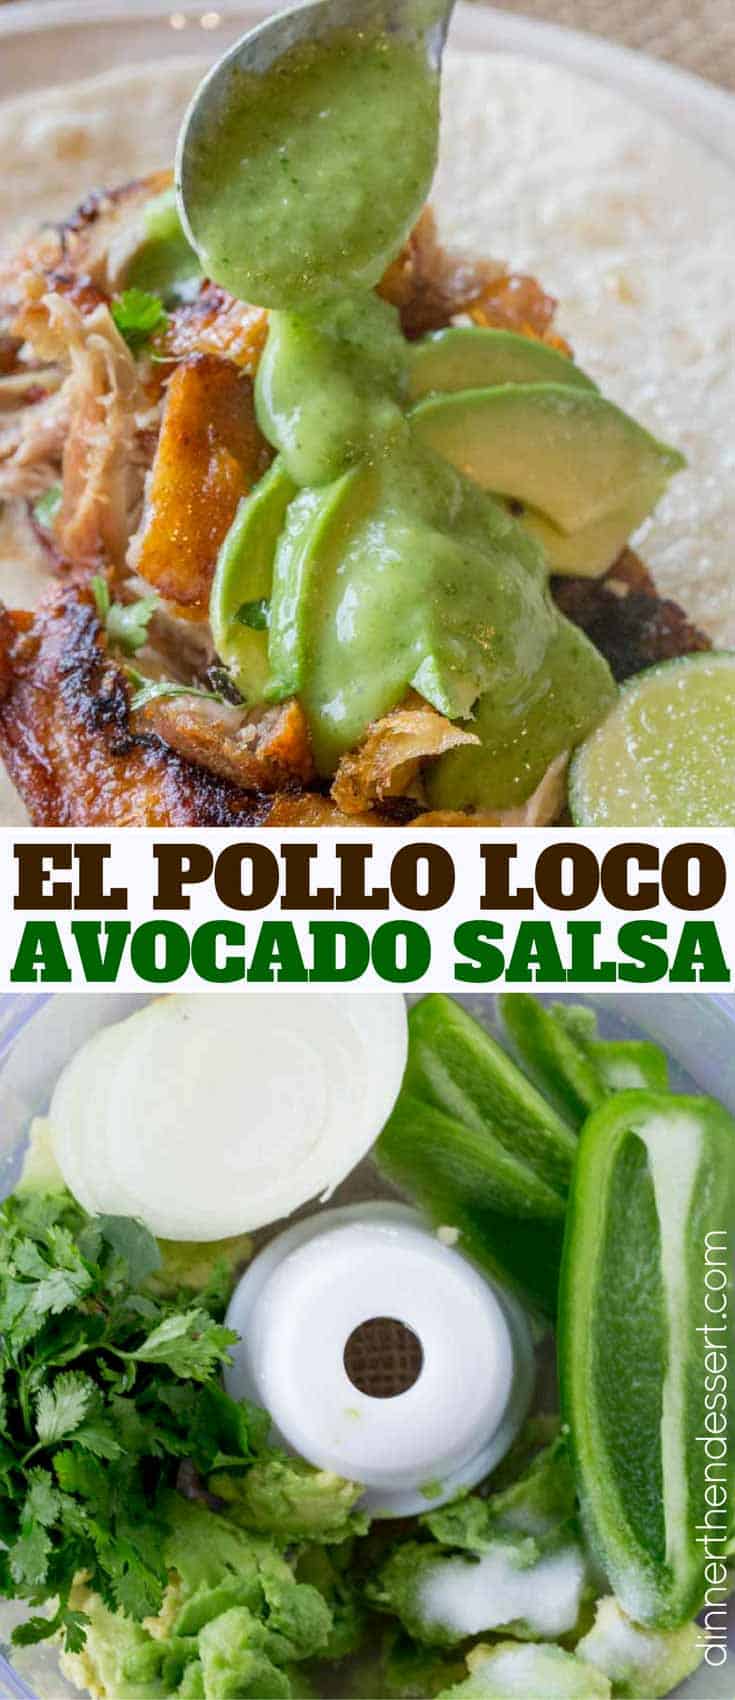 El Pollo Loco Avocado Salsa is the perfect topping for your favorite takeout chicken, spicy and creamy in just five minutes!